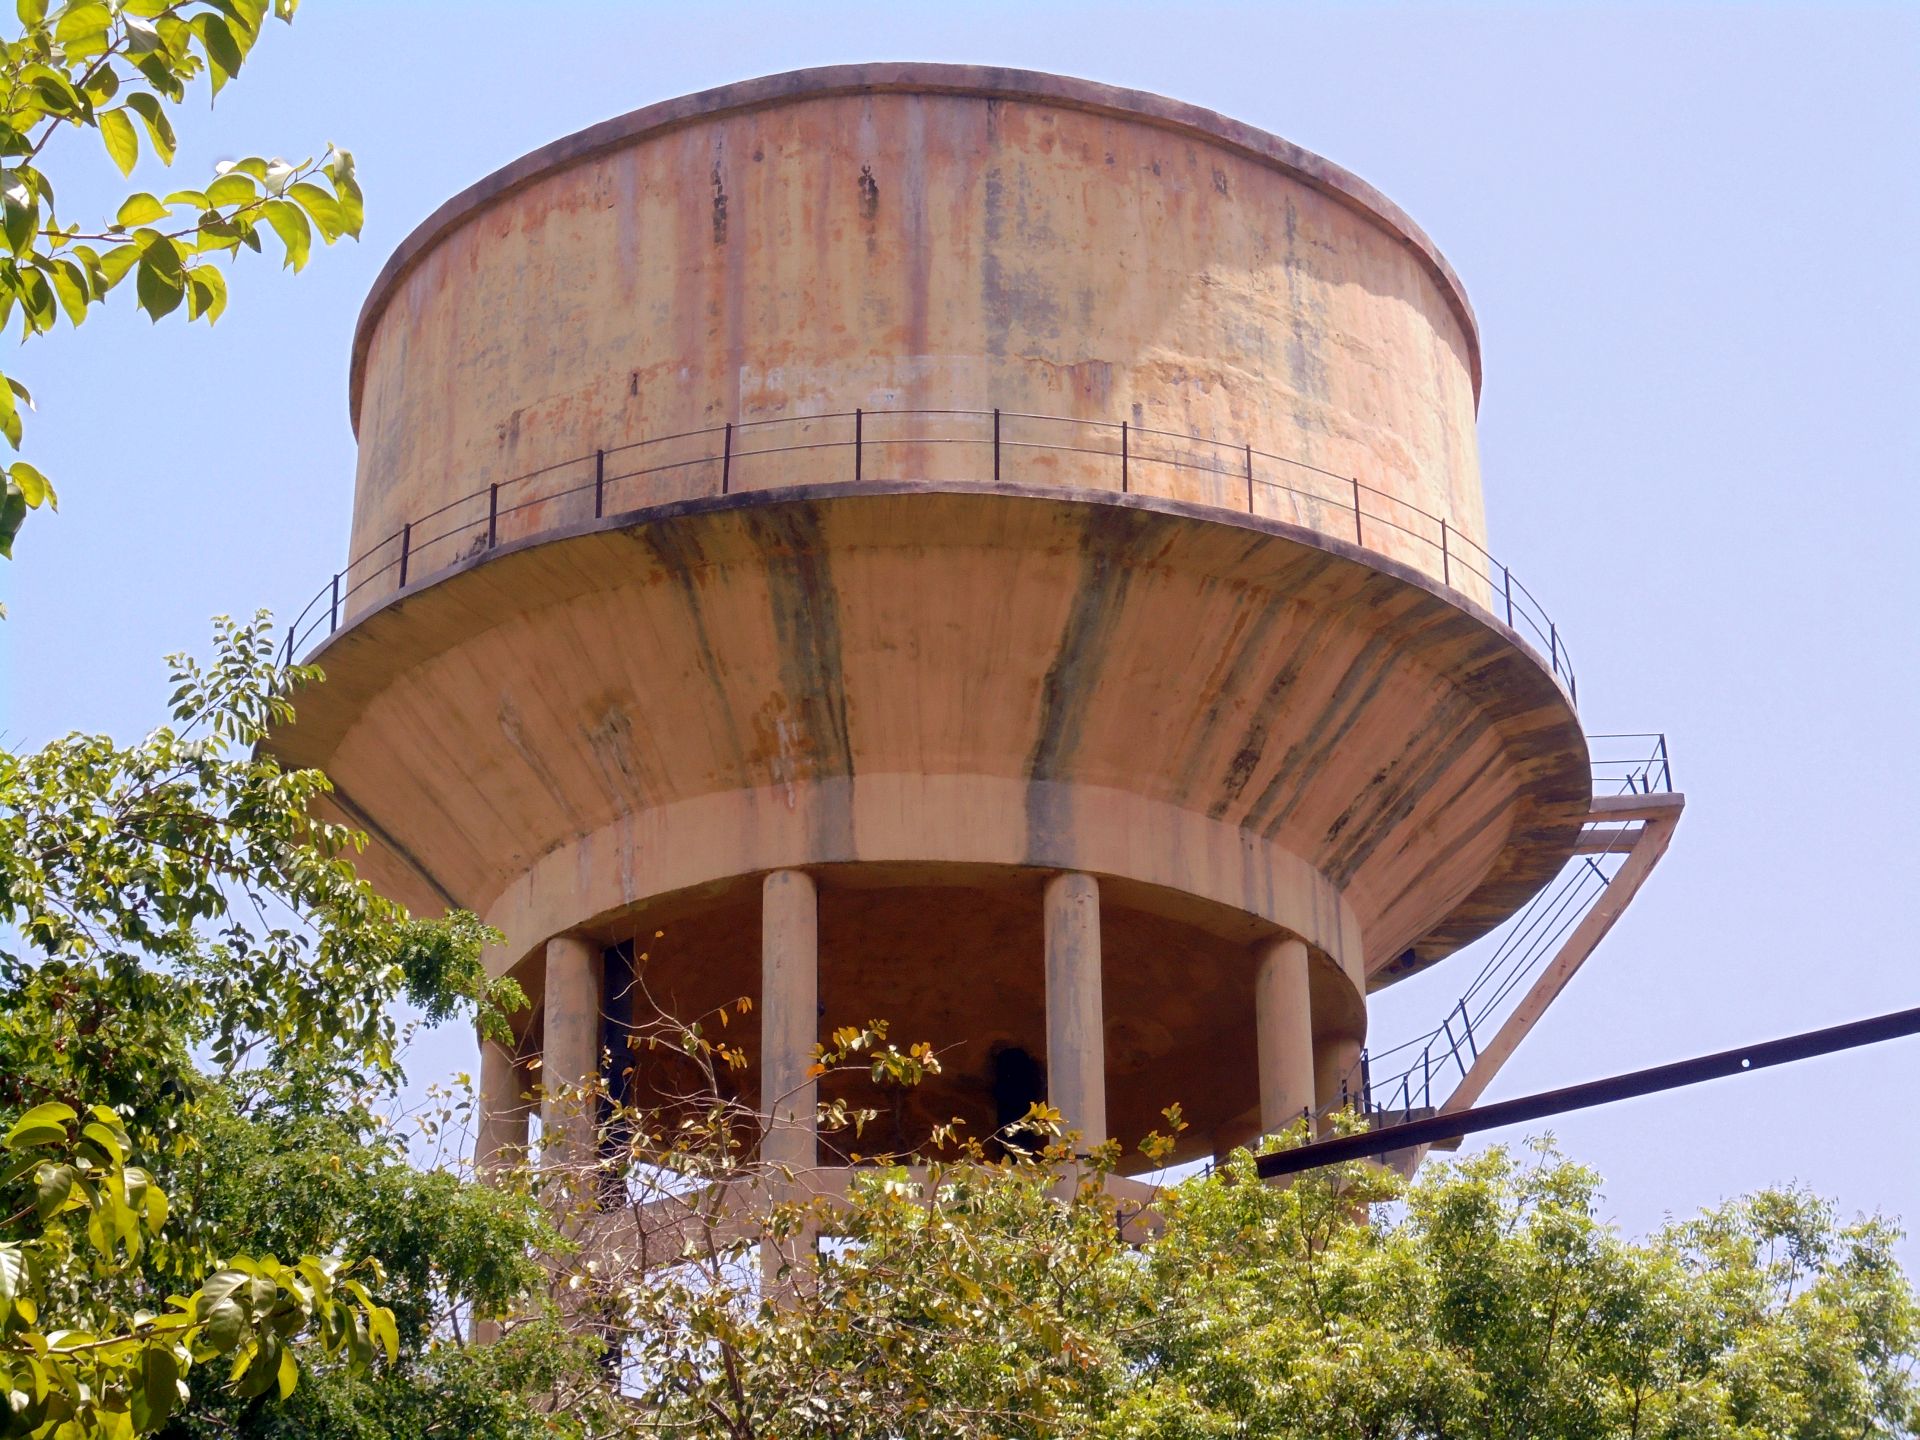 Alwar town does not have its surface water source and is completely dependent on groundwater which is pumped into overhead tanks and supplied through the water supply system.